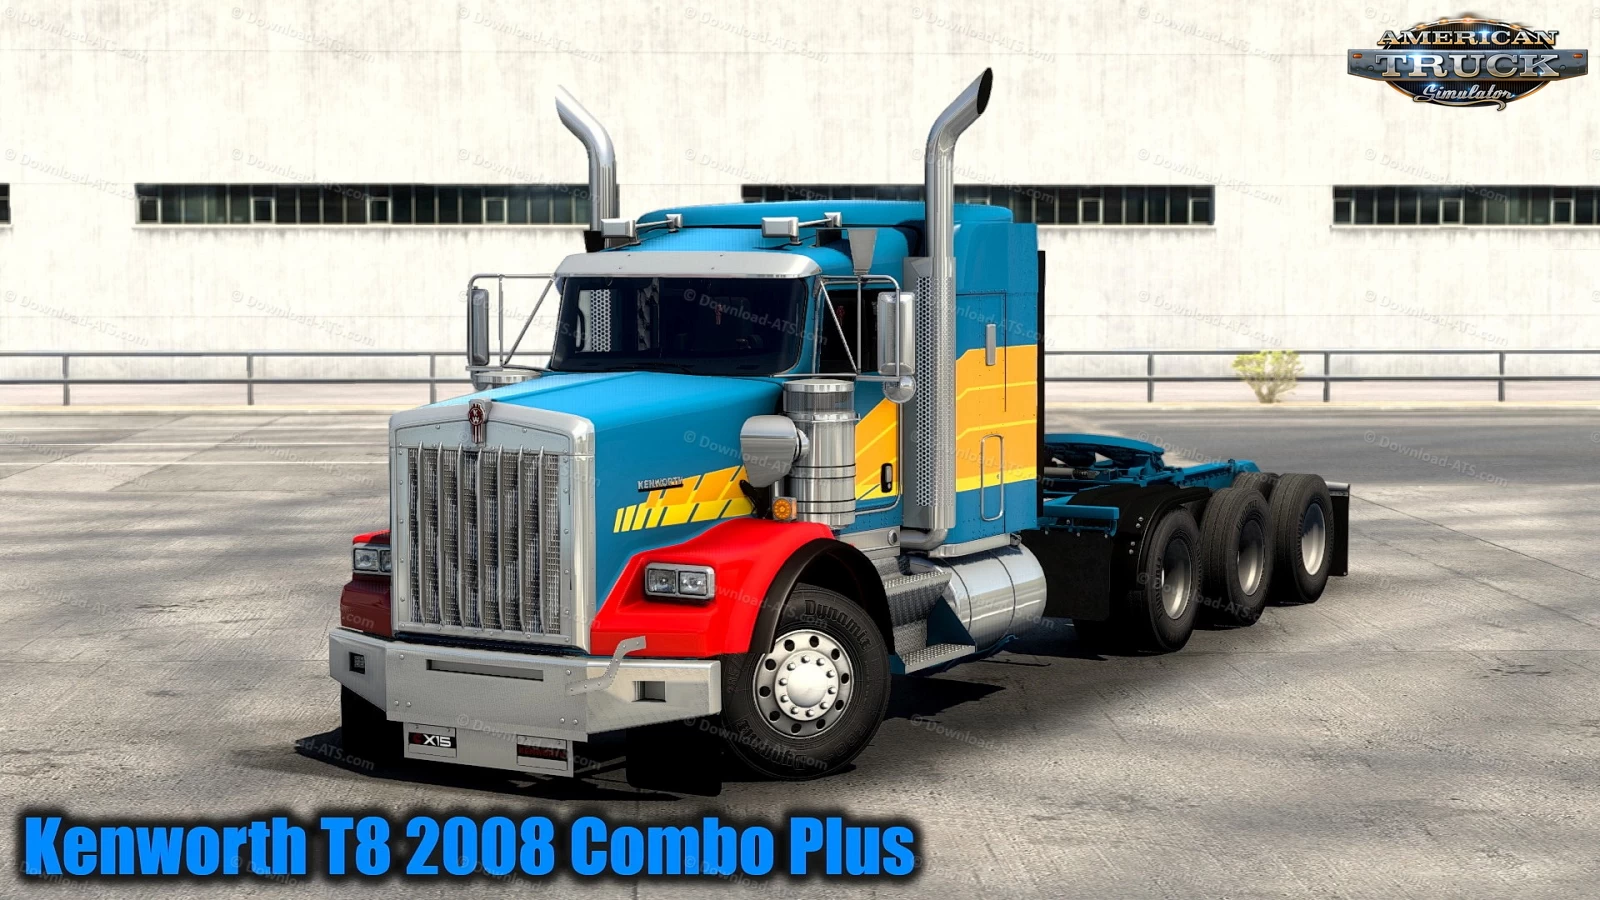 Kenworth T8 2008 Combo Plus v1.0 (1.43.x) for ATS